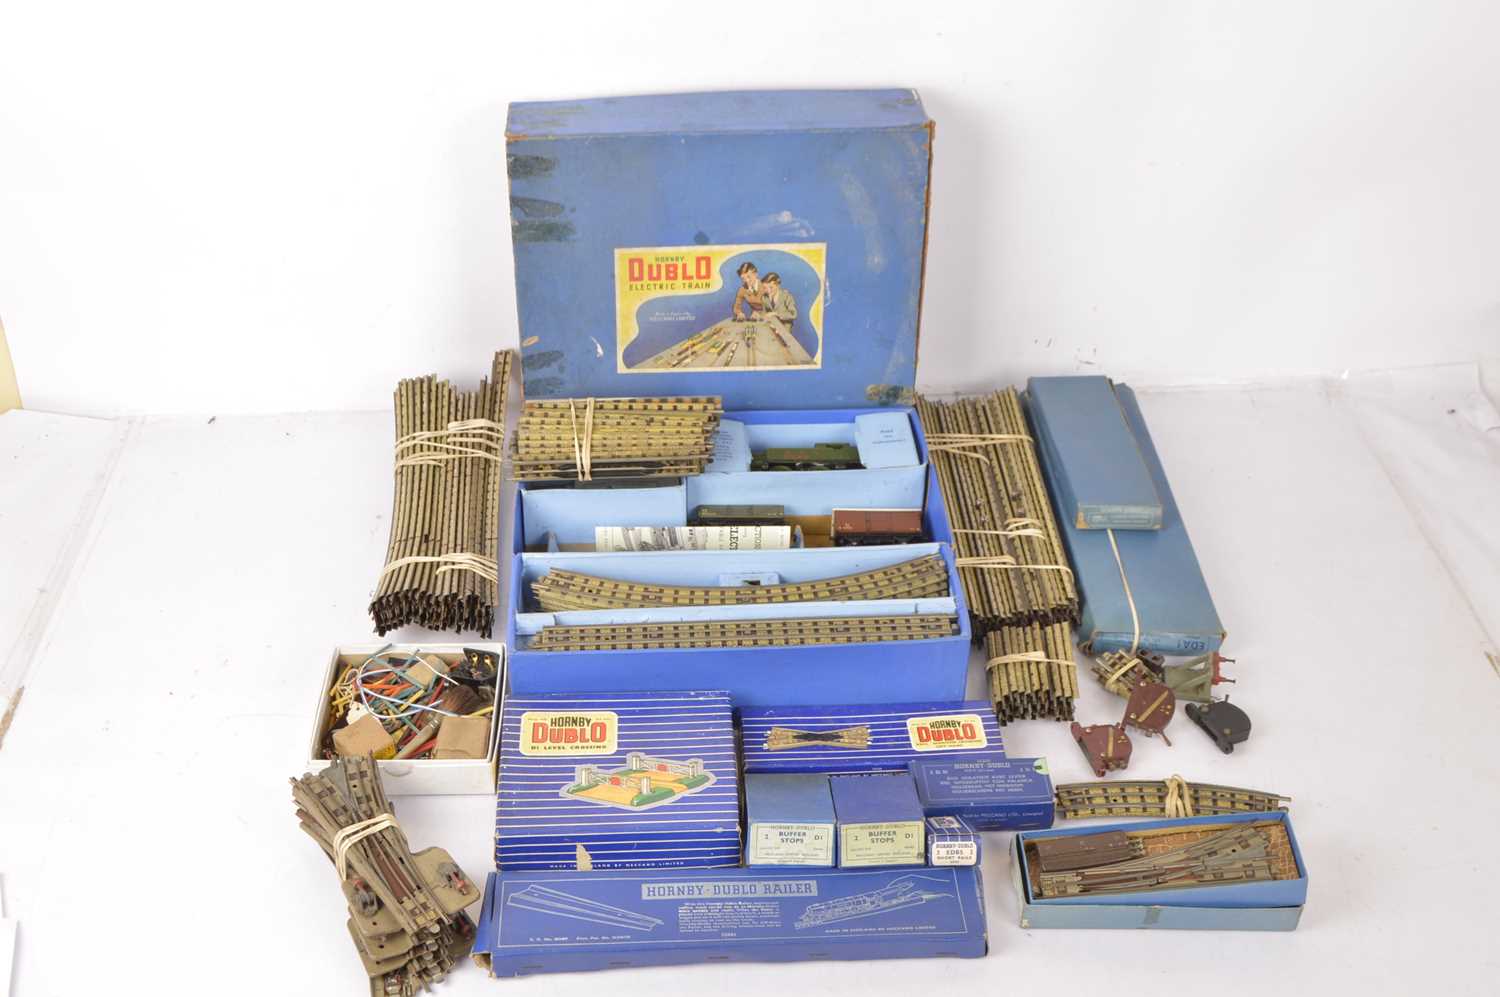 Lot 590 - Hornby-Dublo 00 Gauge 3-rail EDG7 LNER Goods Train Set additional Track and Accessories (qty)